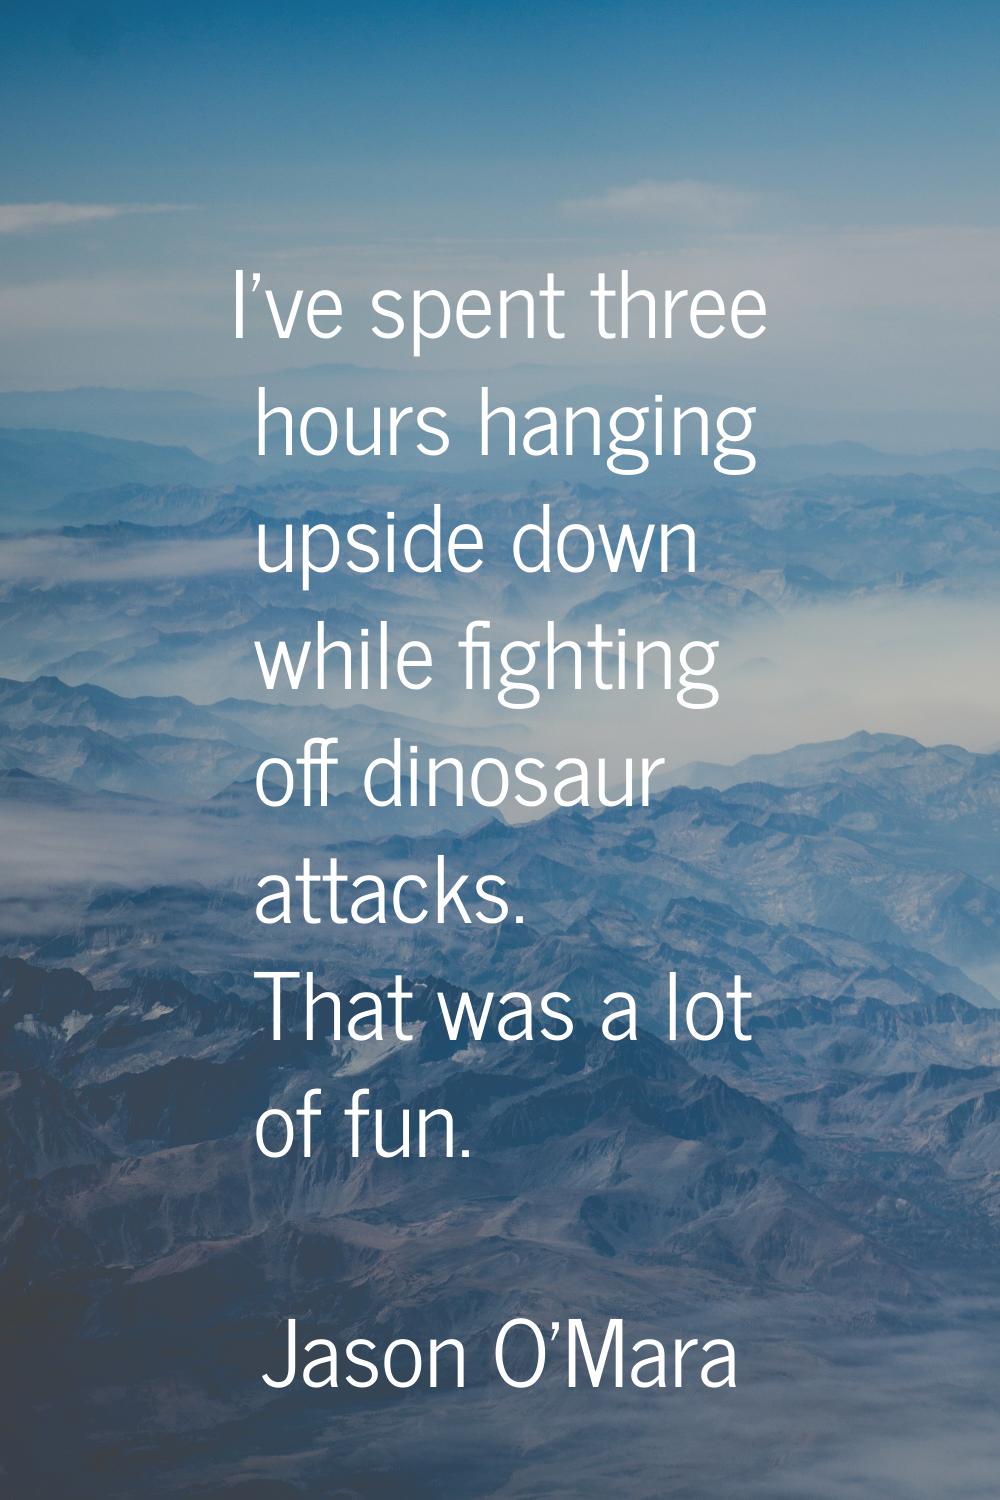 I've spent three hours hanging upside down while fighting off dinosaur attacks. That was a lot of f